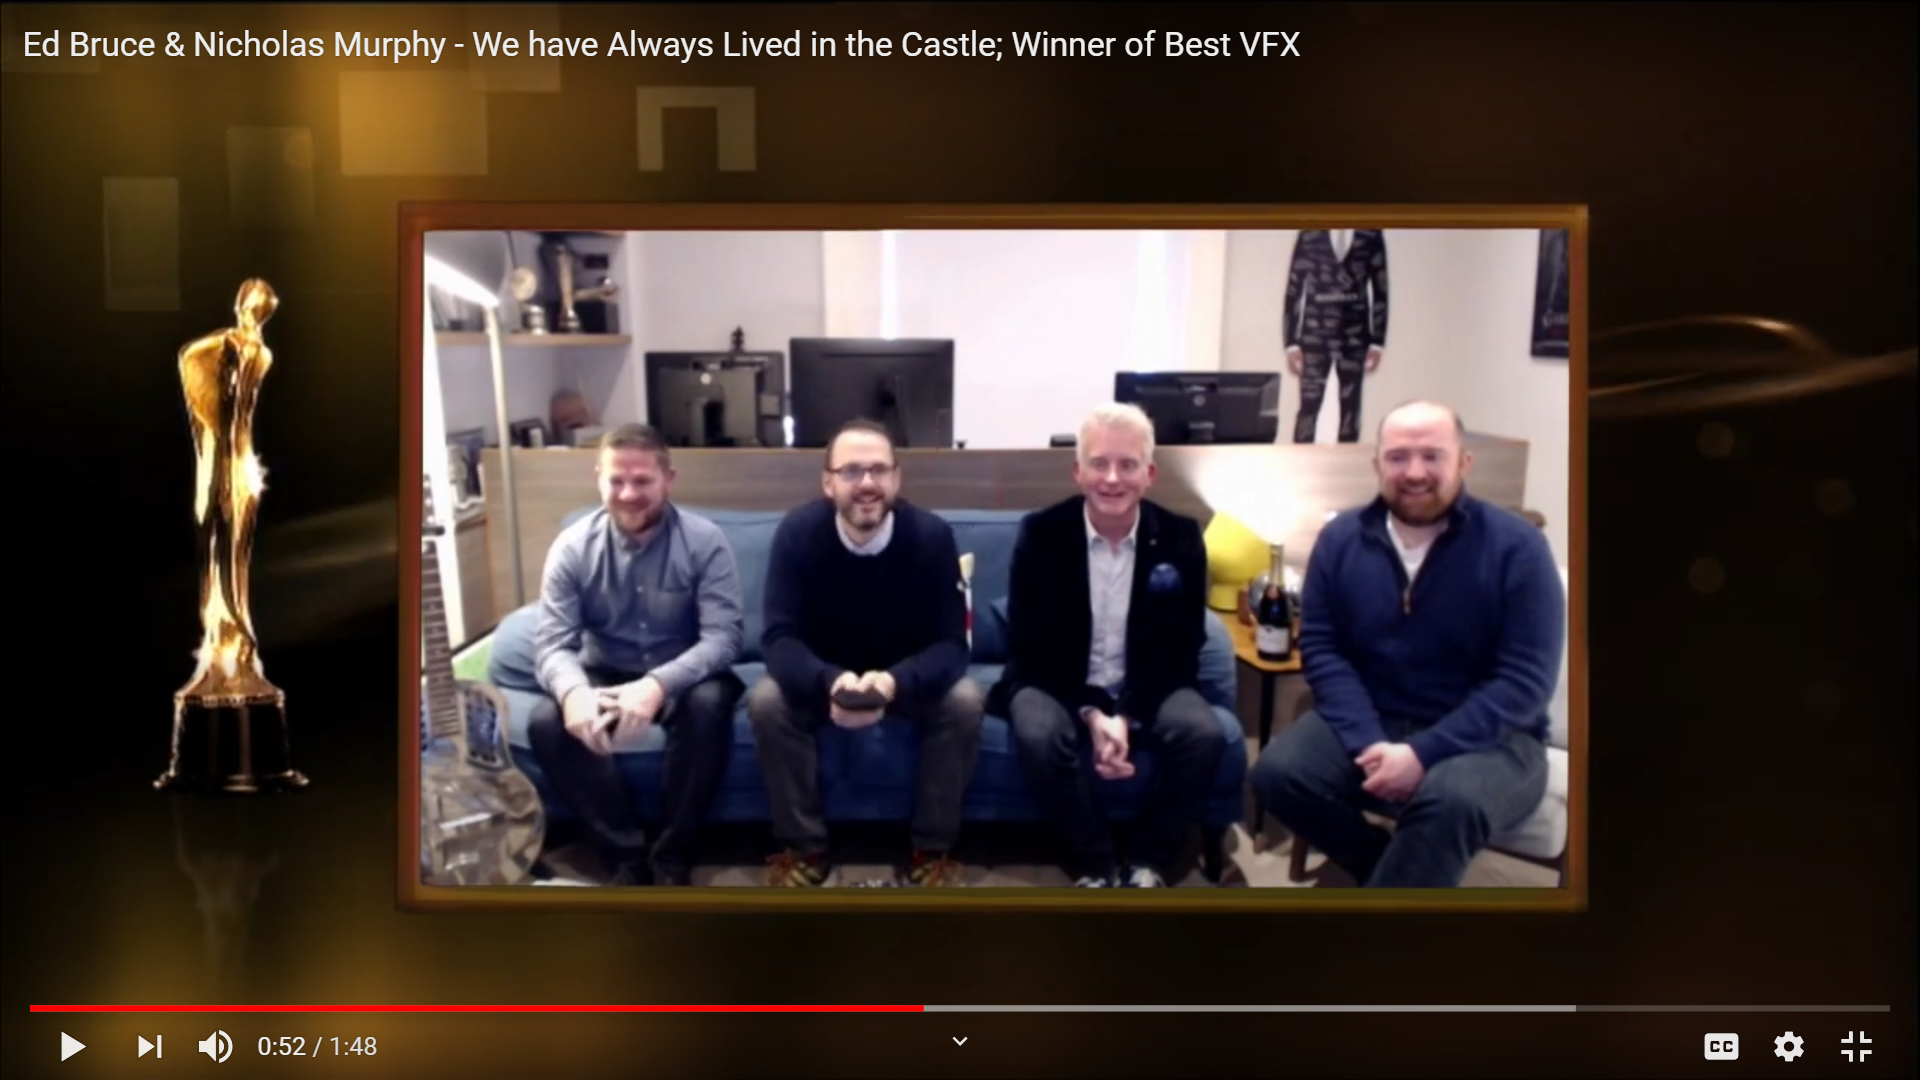 Ed Bruce & Nicholas Murphy 'We Have Always Lived in the Castle' Winner VFX